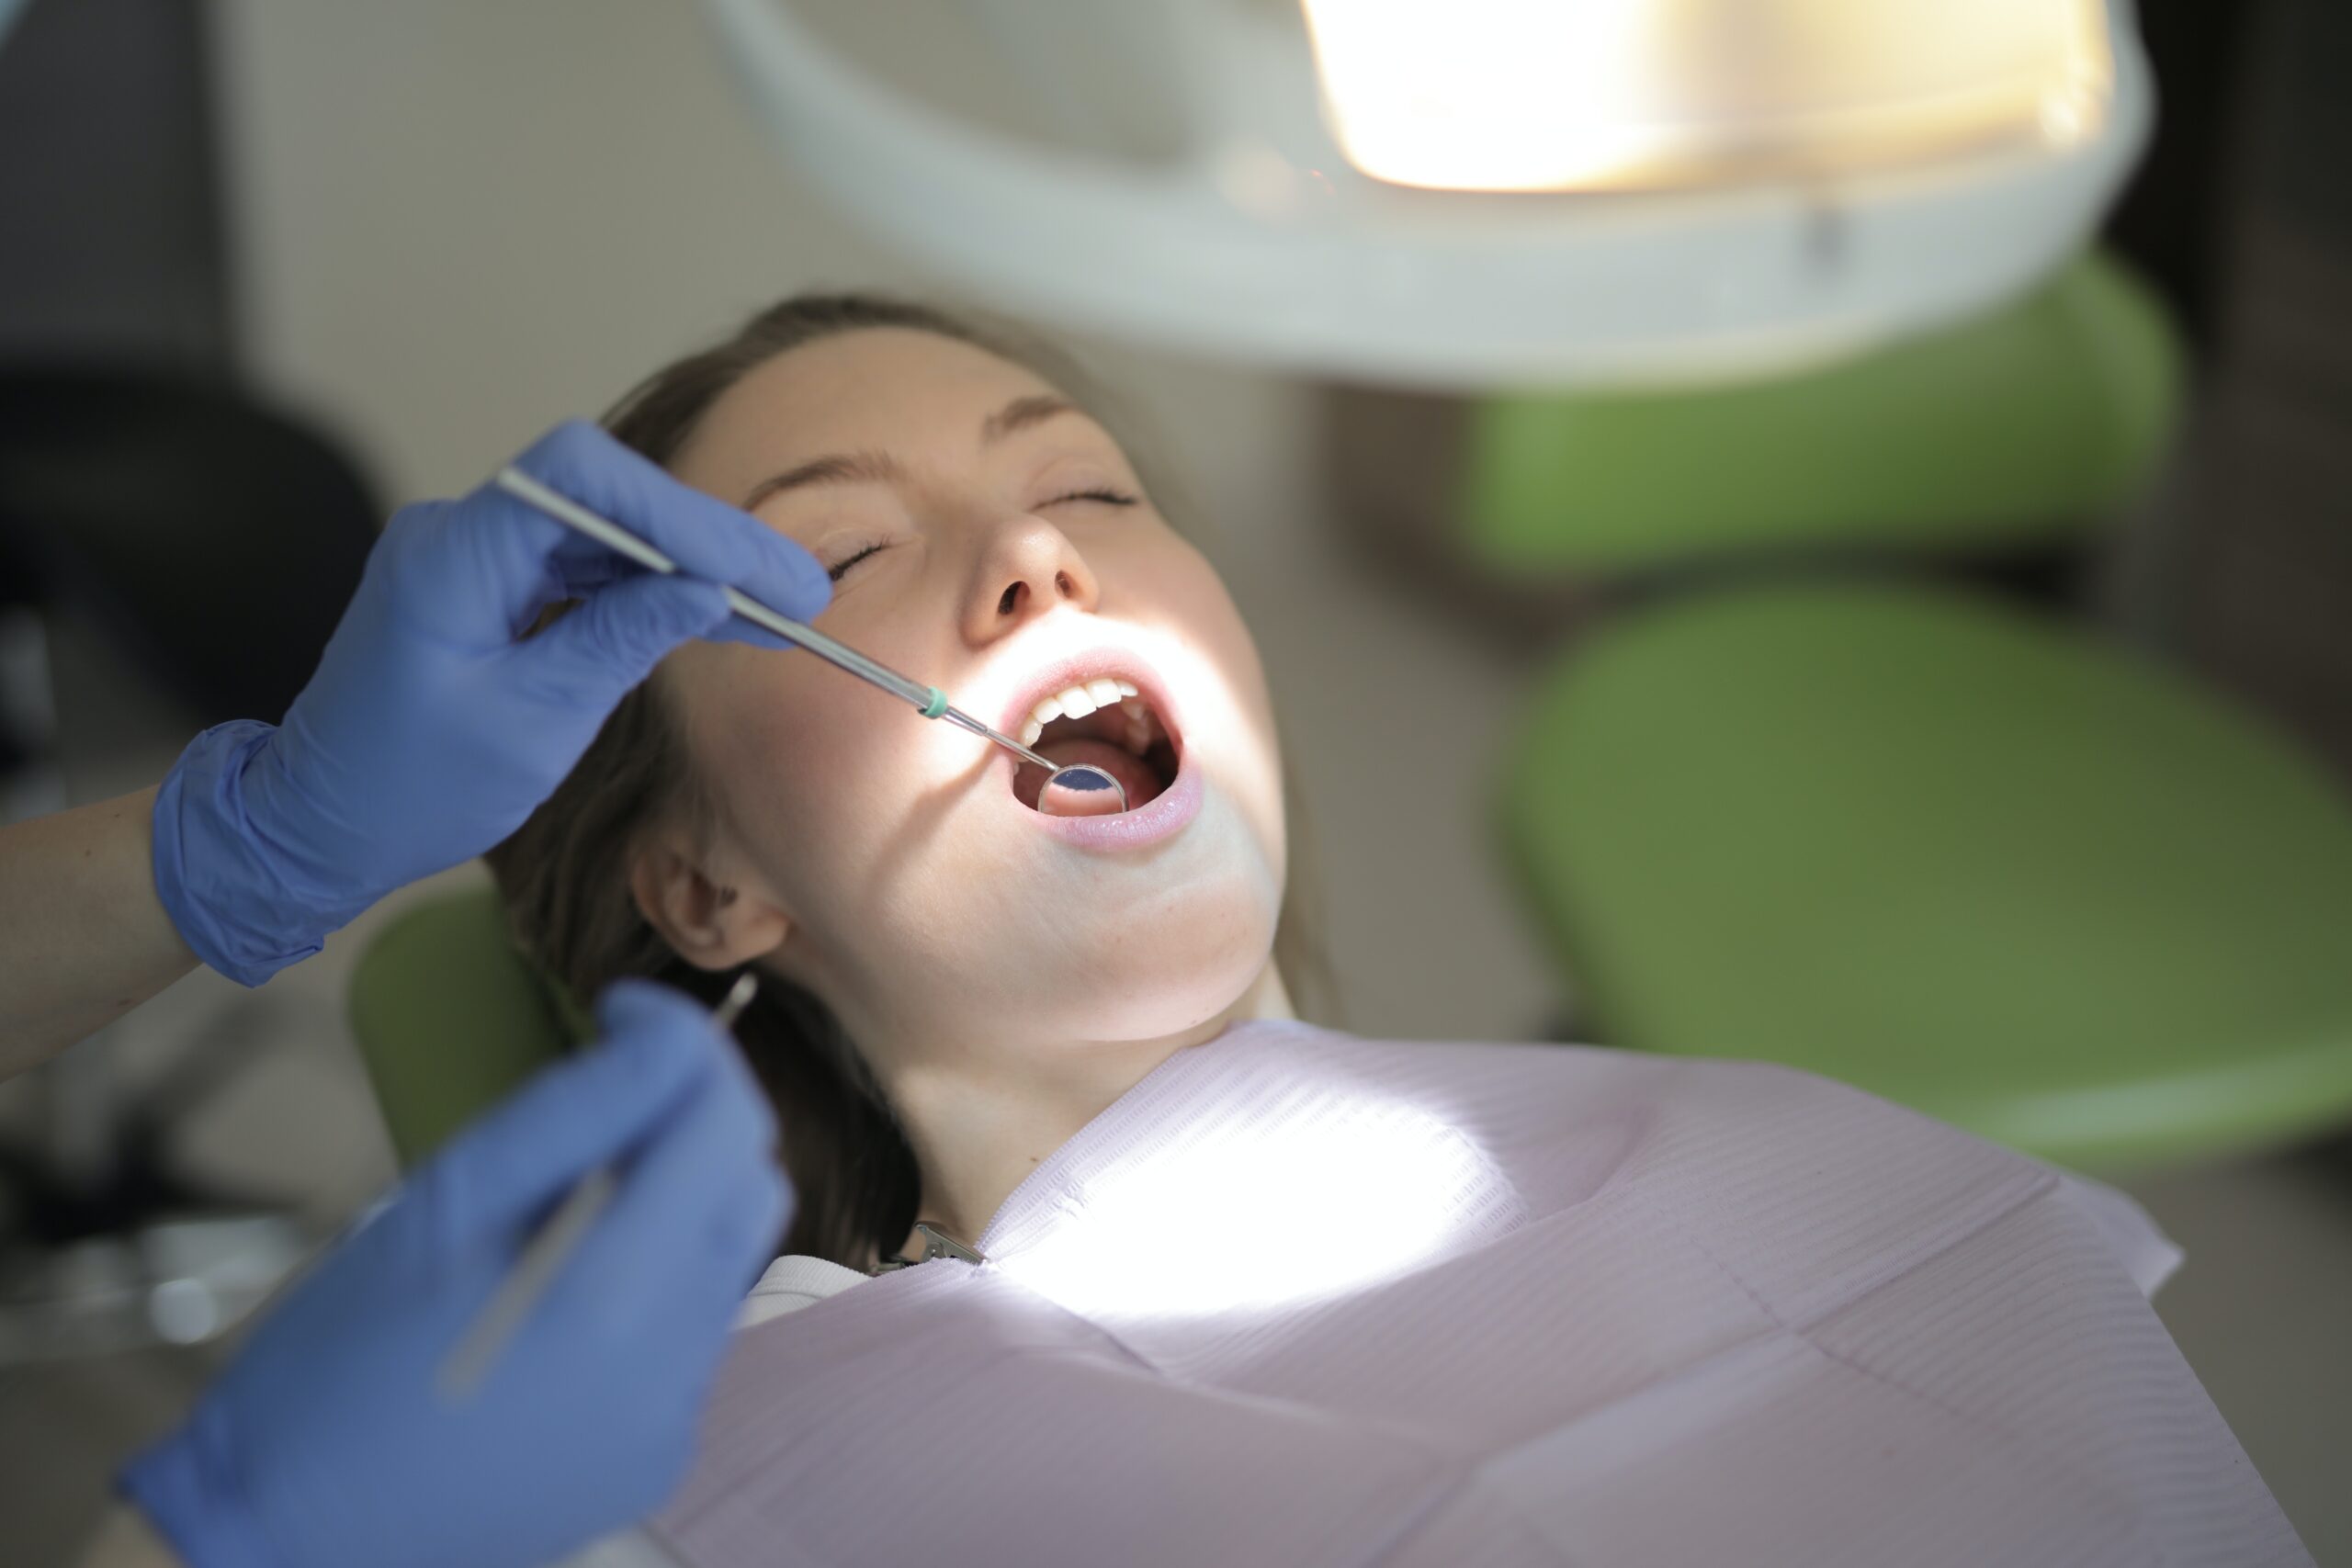 Common Causes of Teeth Grinding and How a Night Guard Can Help